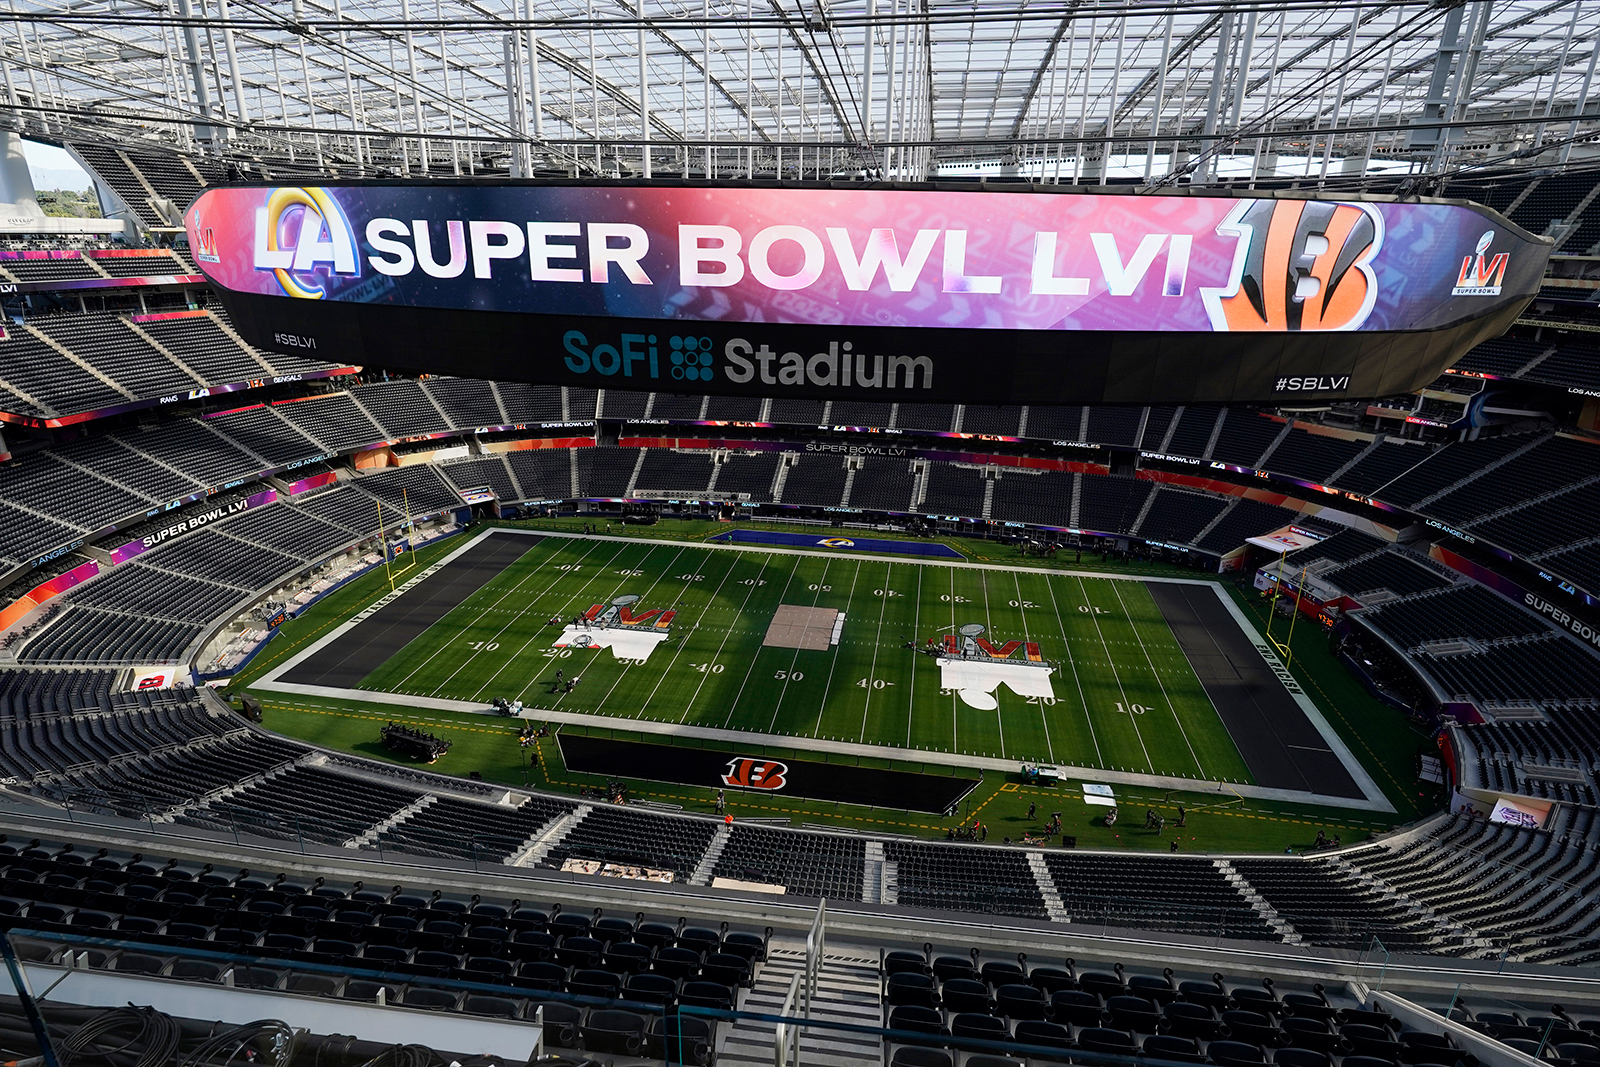 The interior of SoFi Stadium is seen days before the Super Bowl NFL football game on February 8, in Inglewood, California